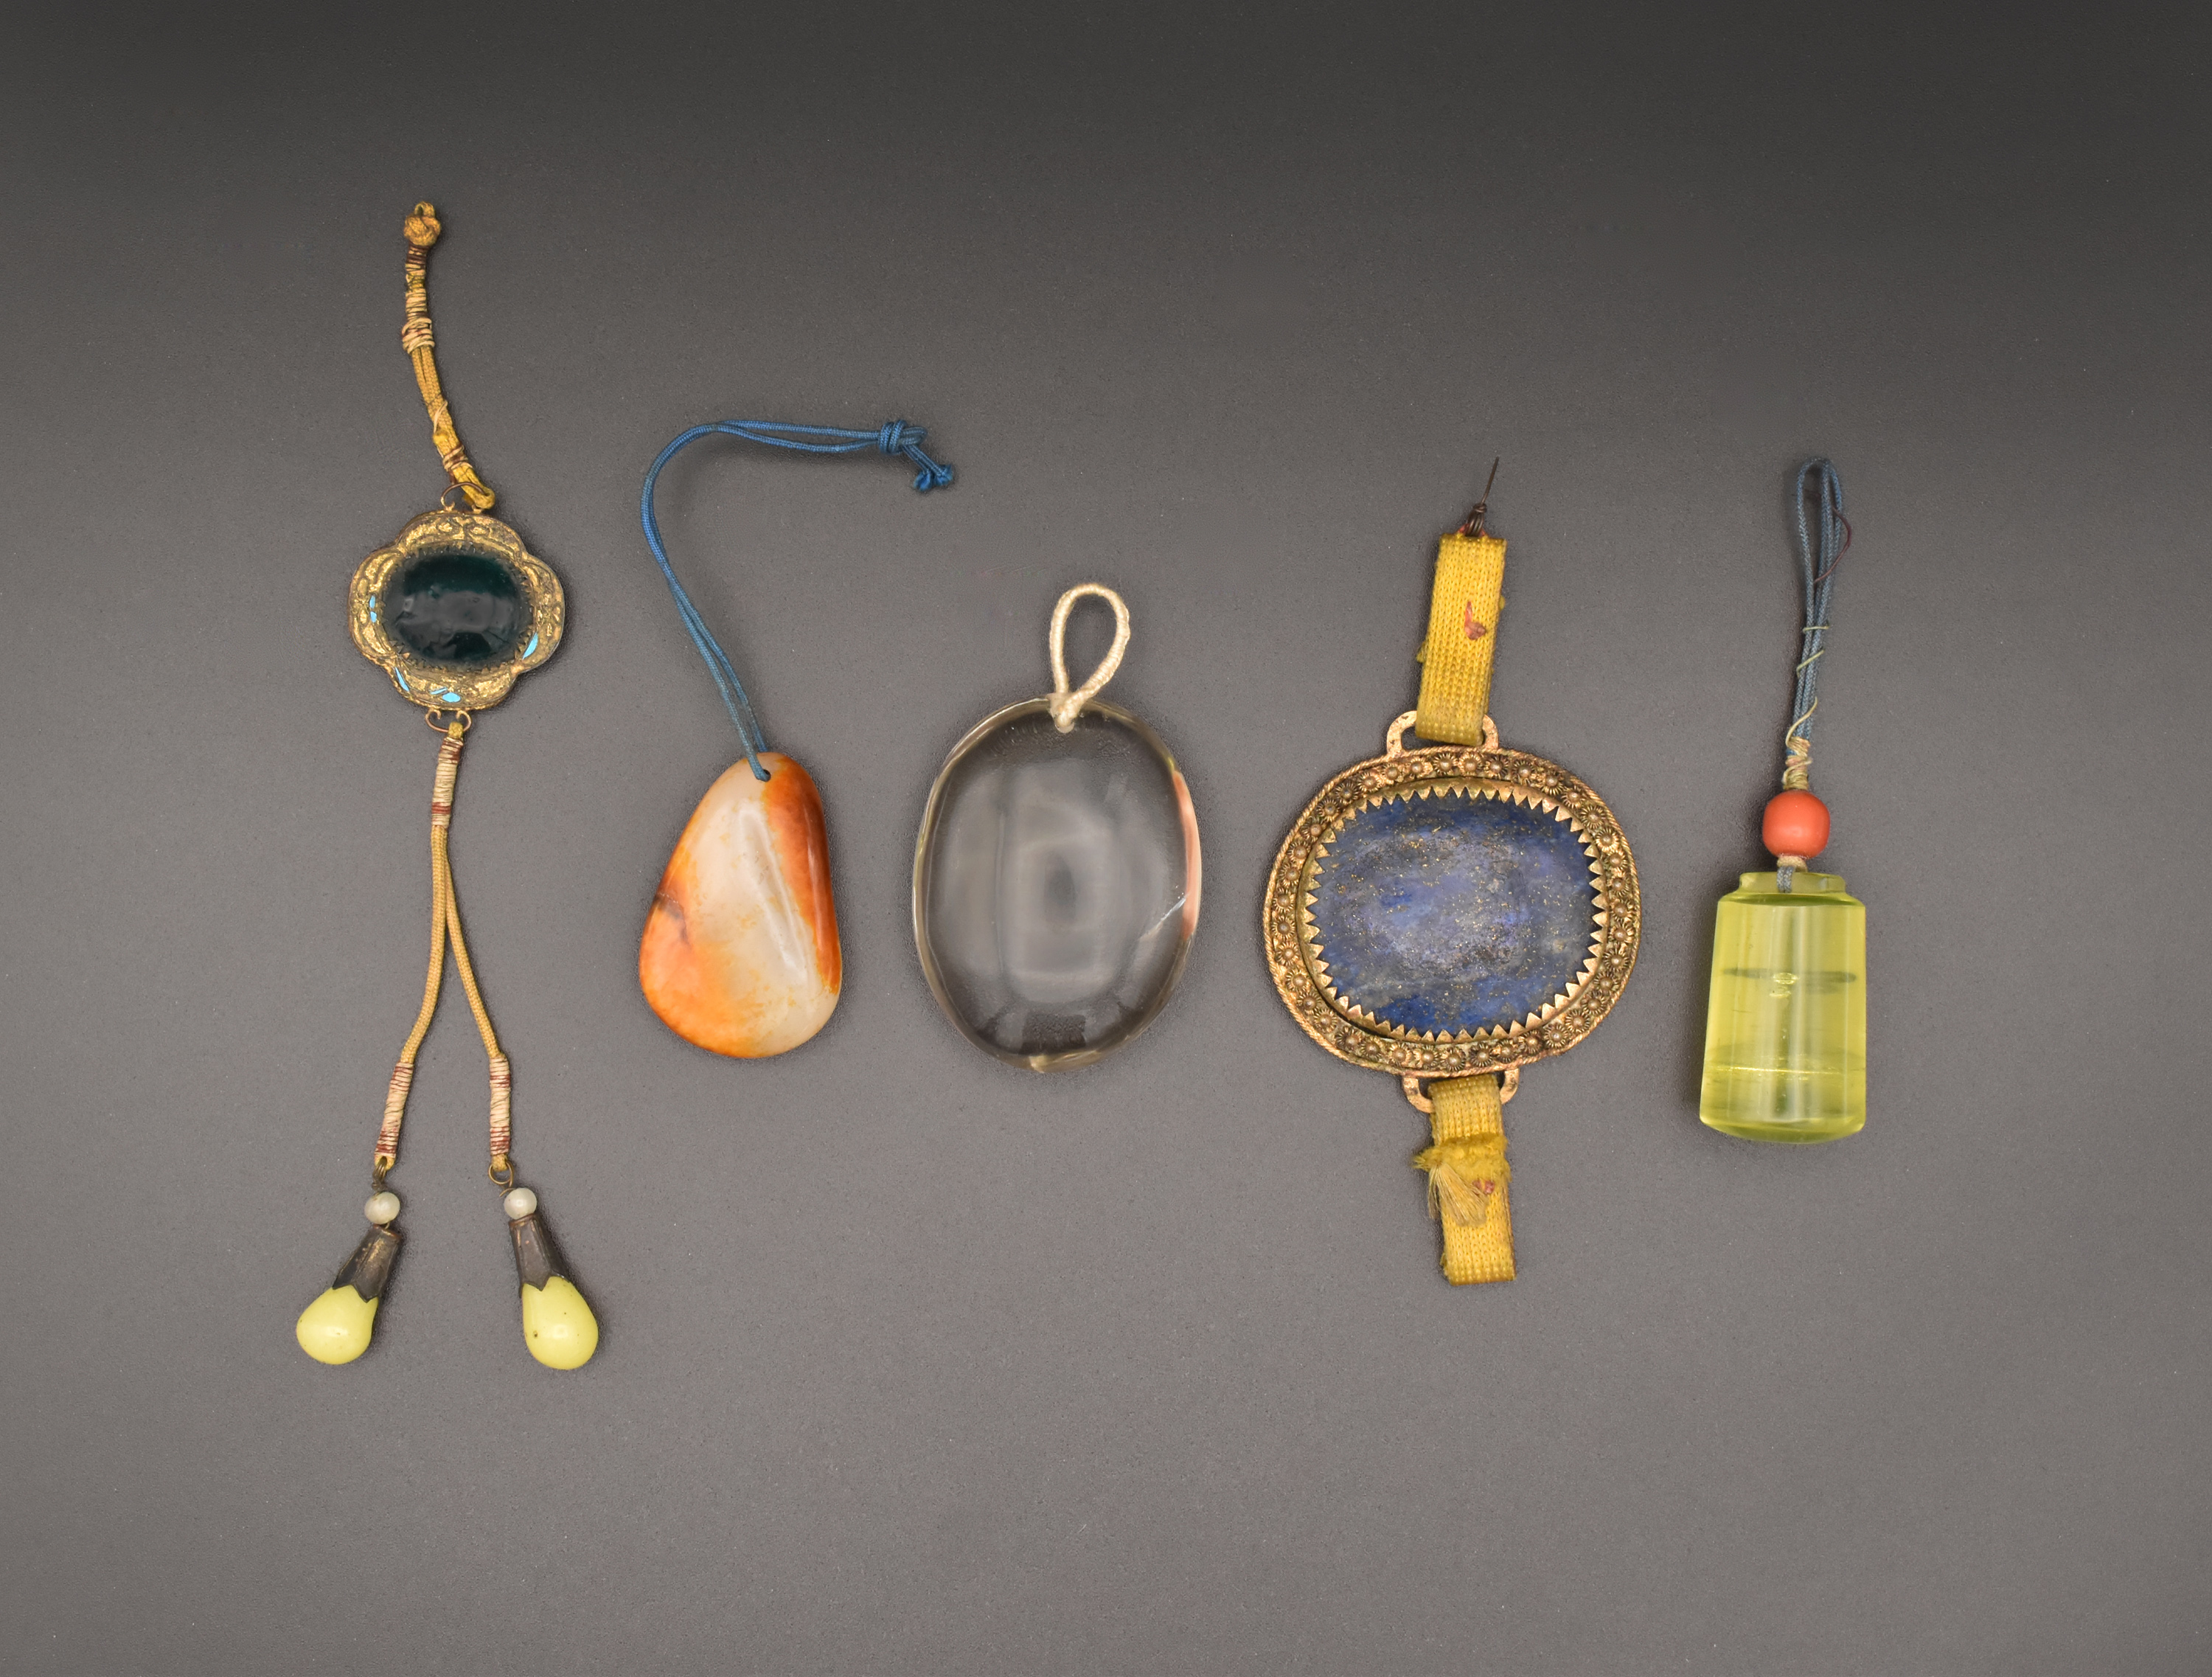 A GROUP OF FIVE CHINESE QING DYNASTY COSTUME ACCESSORIES, 18TH/19TH CENTURY